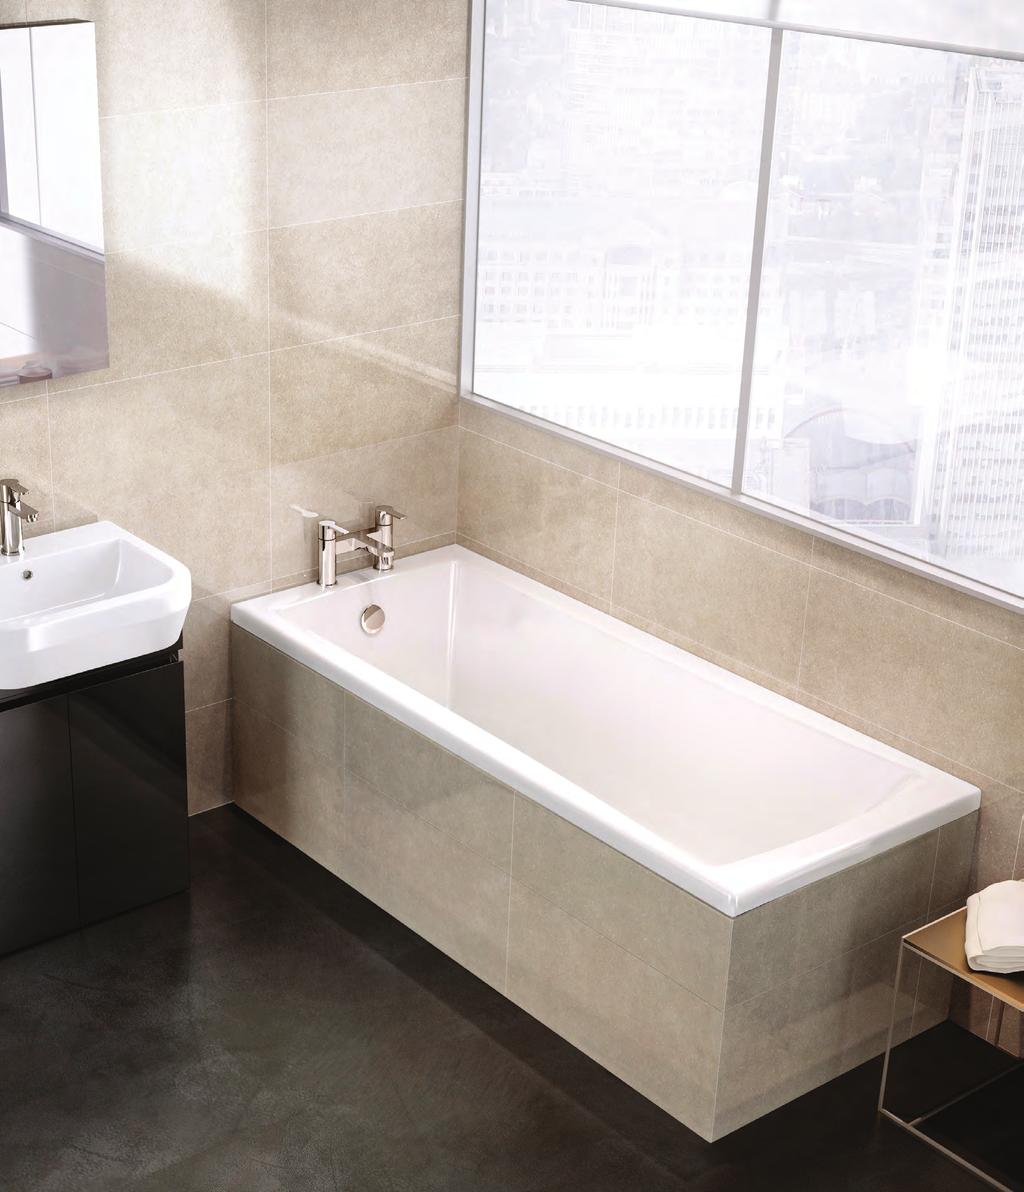 SUSTAIN Single ended bath The Sustain provides a square internal shape for those preferring the more geometric and angular look.